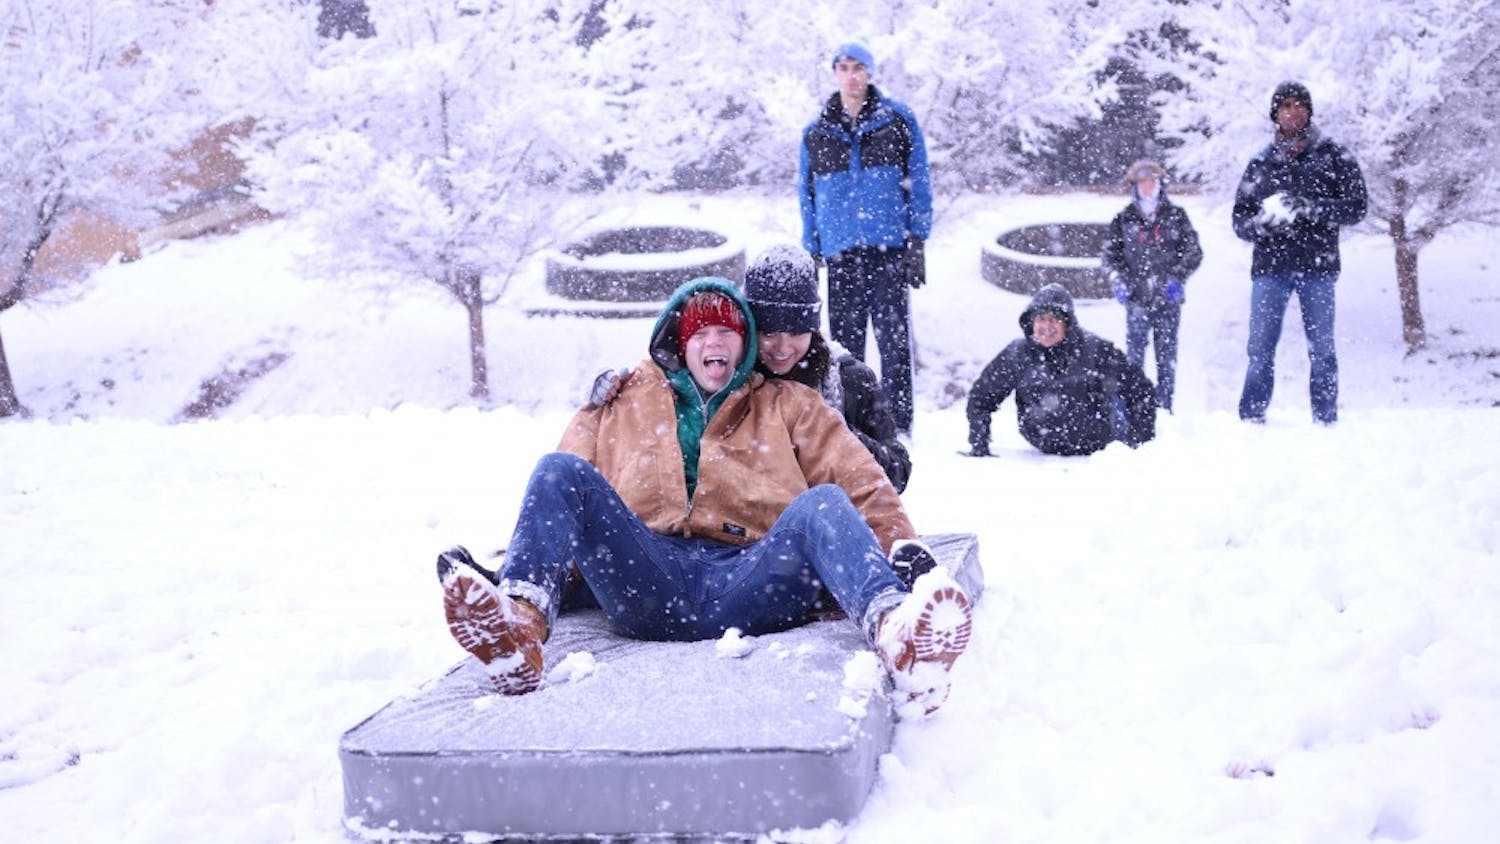 First-years Grantito Everist (left) and Cat Chang (right) use a mattress to sled down the hill at the Dean Smith Center during Wednesday's snowstorm.